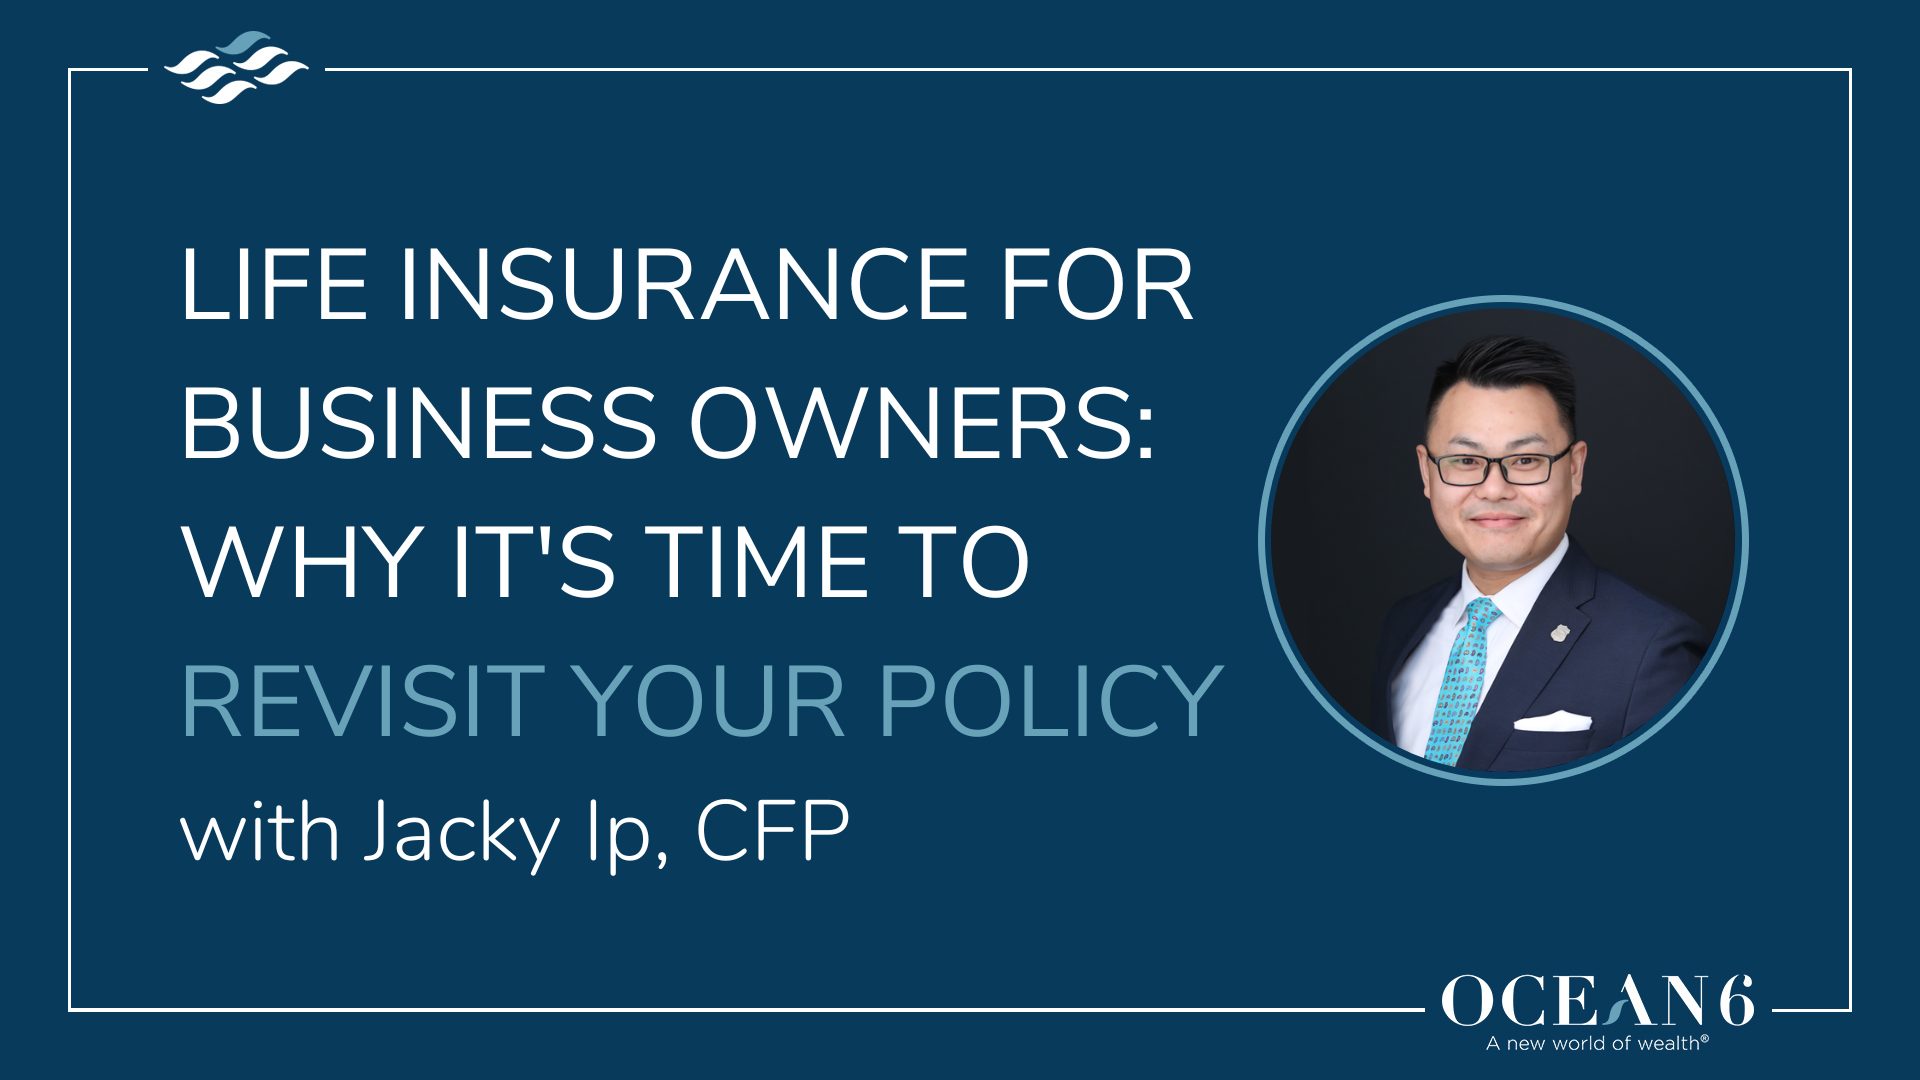 Advisor headshot - life insurance for business owners: why it's time to revisit your policy